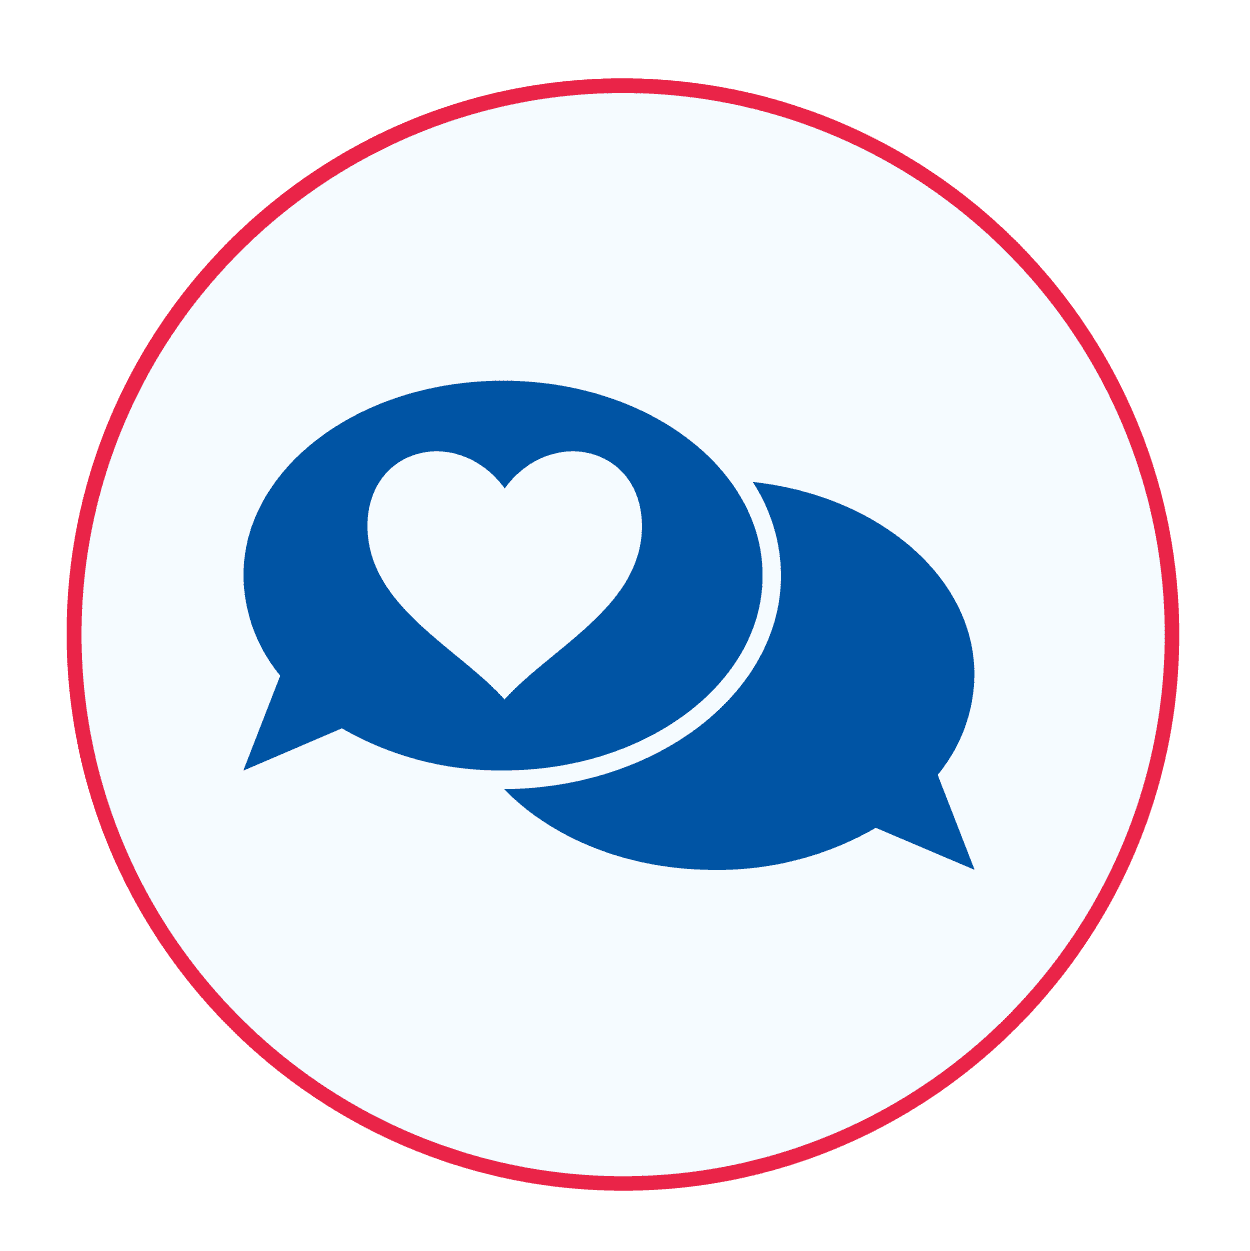 icon of a speech bubble with a heart inside.